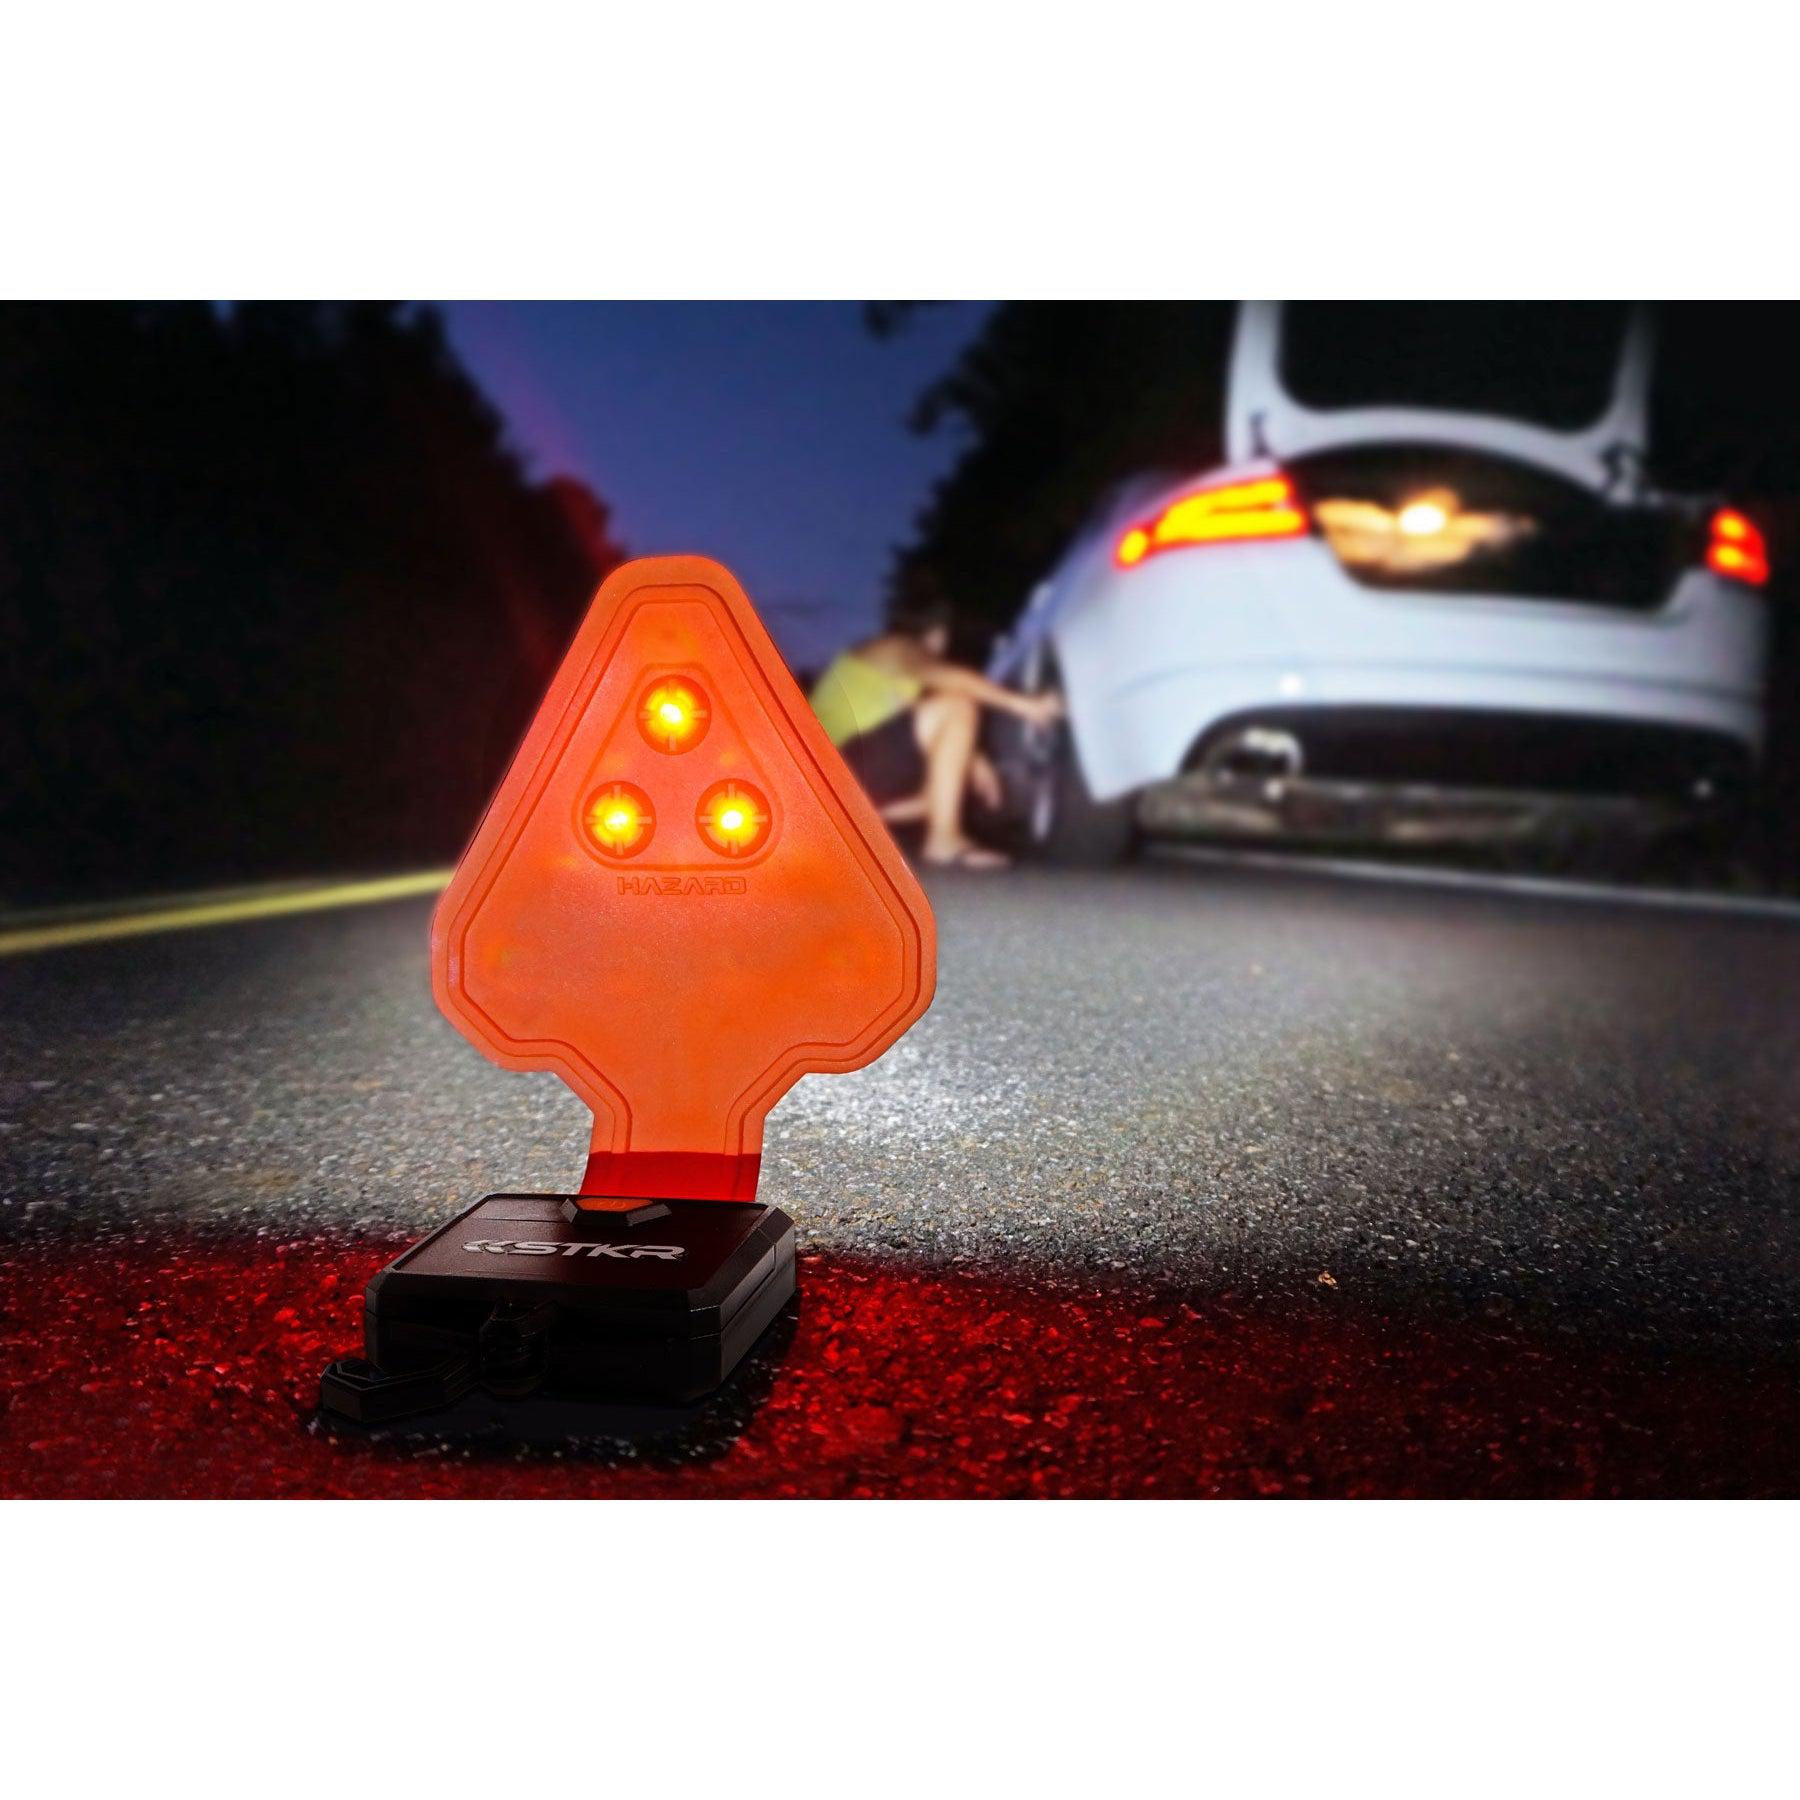 FLEXIT Auto - Flexible Flashlight for roadside assistance and more